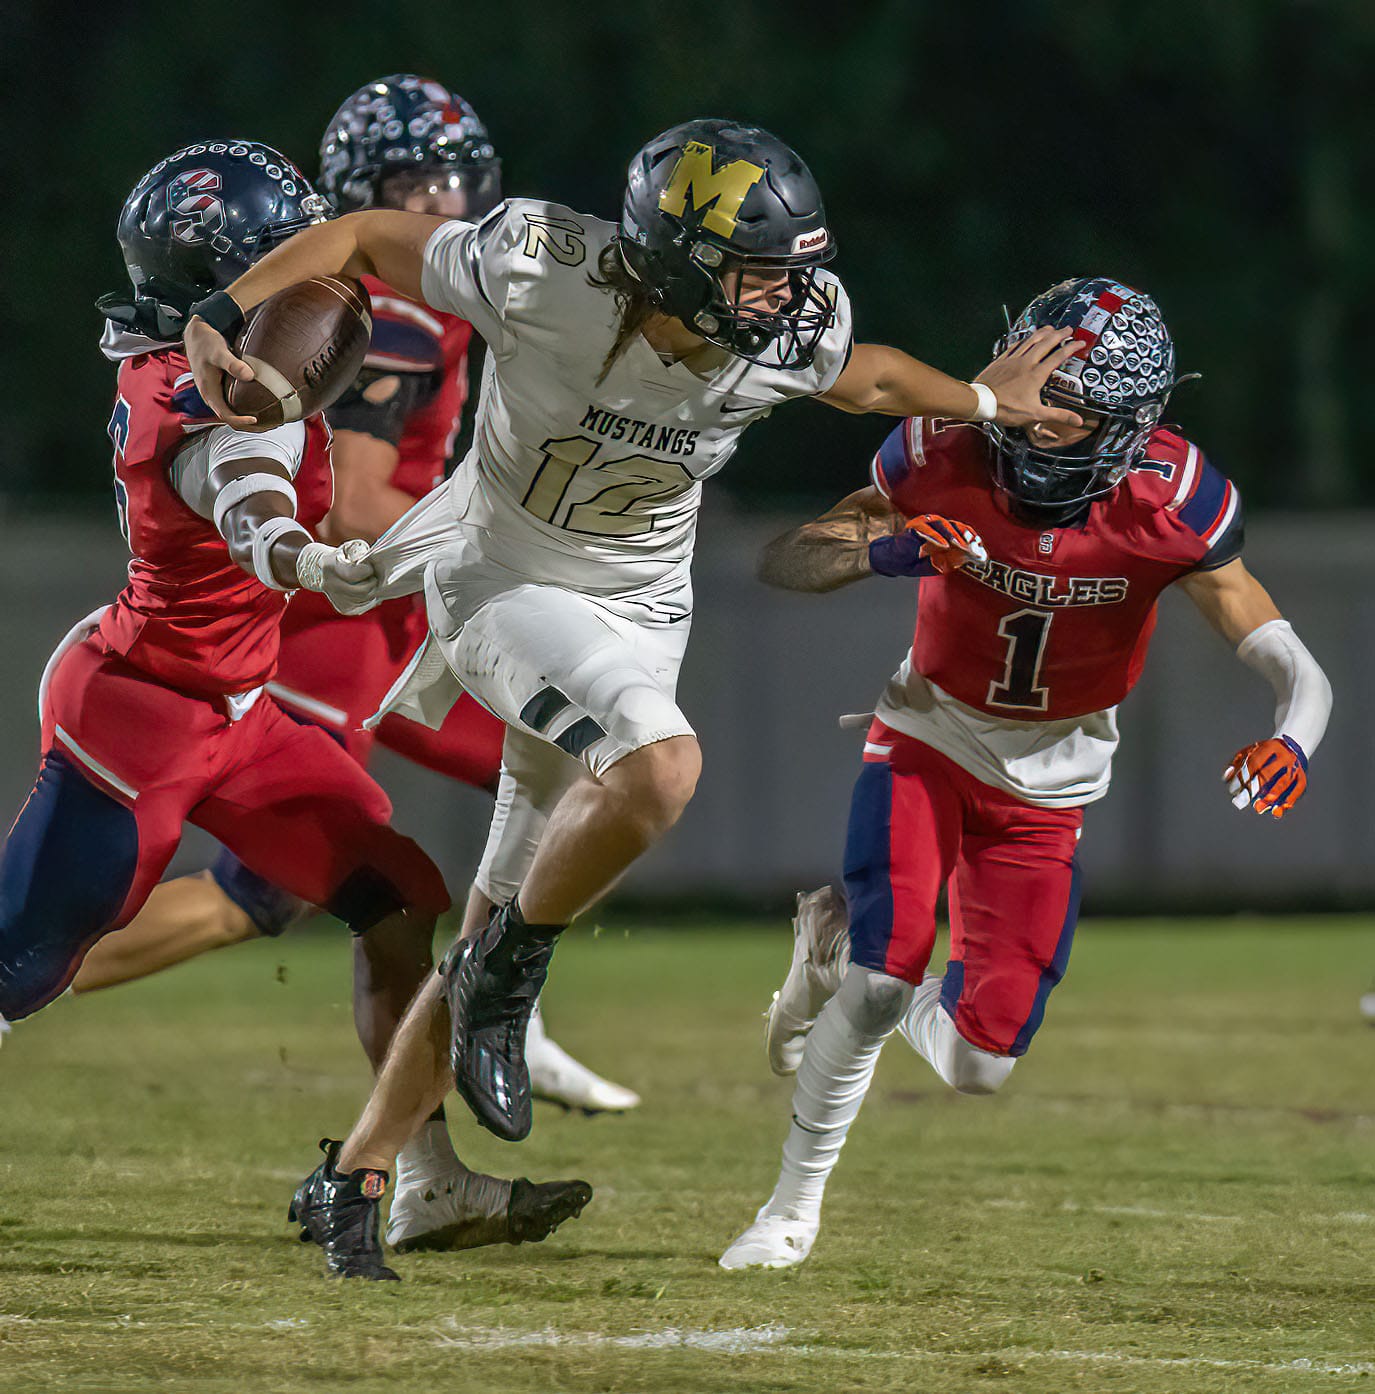 Mitchell QB, 12, Chris Ferrini, proved tough to stop for the Springstead defense, uses a straight arm on, 1, Luca Garguillo who with, 6, Xavier Harris combined for the tackle. Photo by JOE DiCRISTOFALO